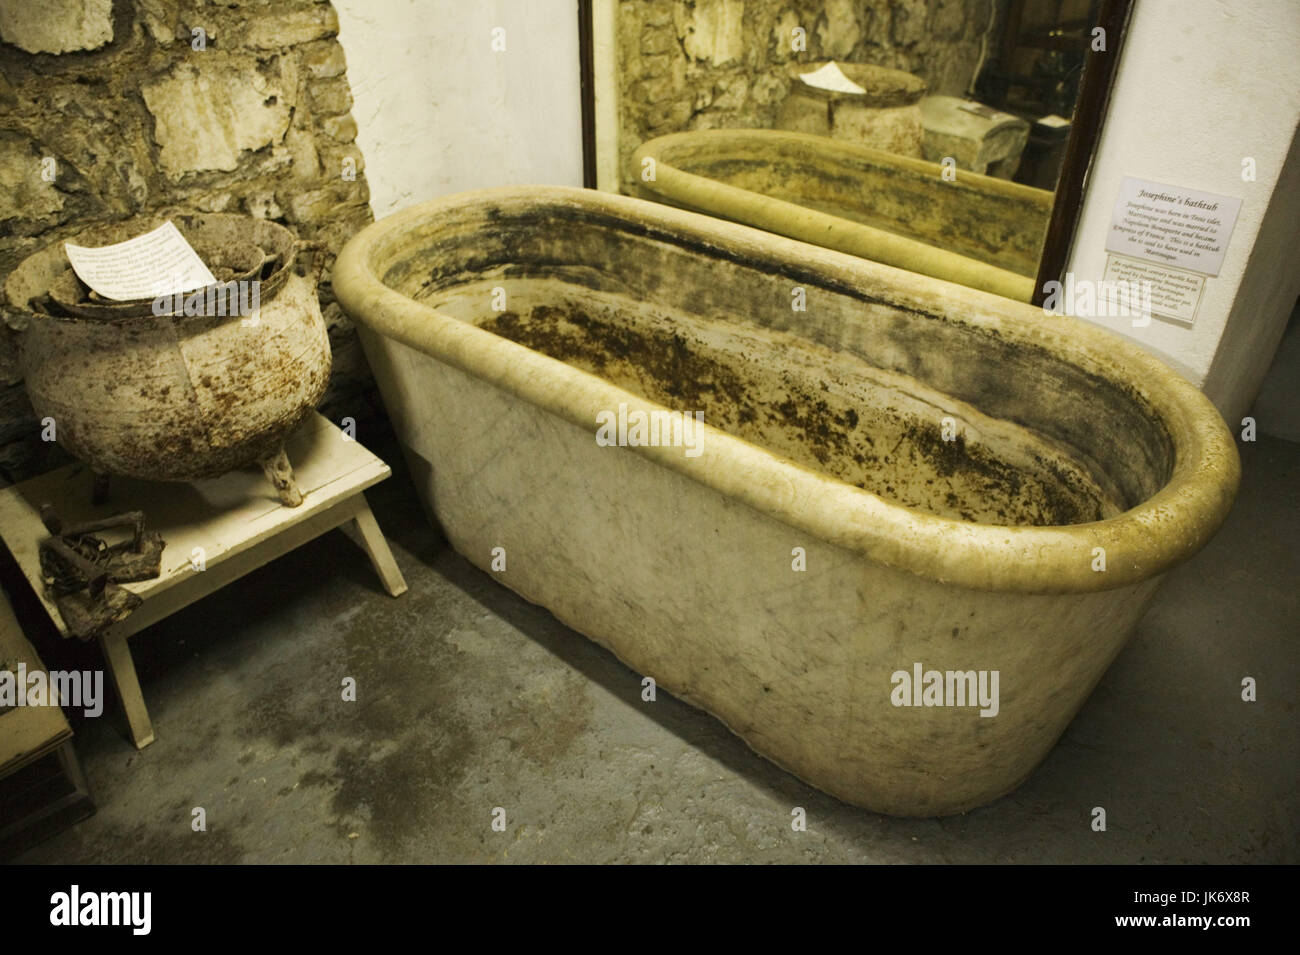 Badewanne High Resolution Stock Photography and Images - Alamy